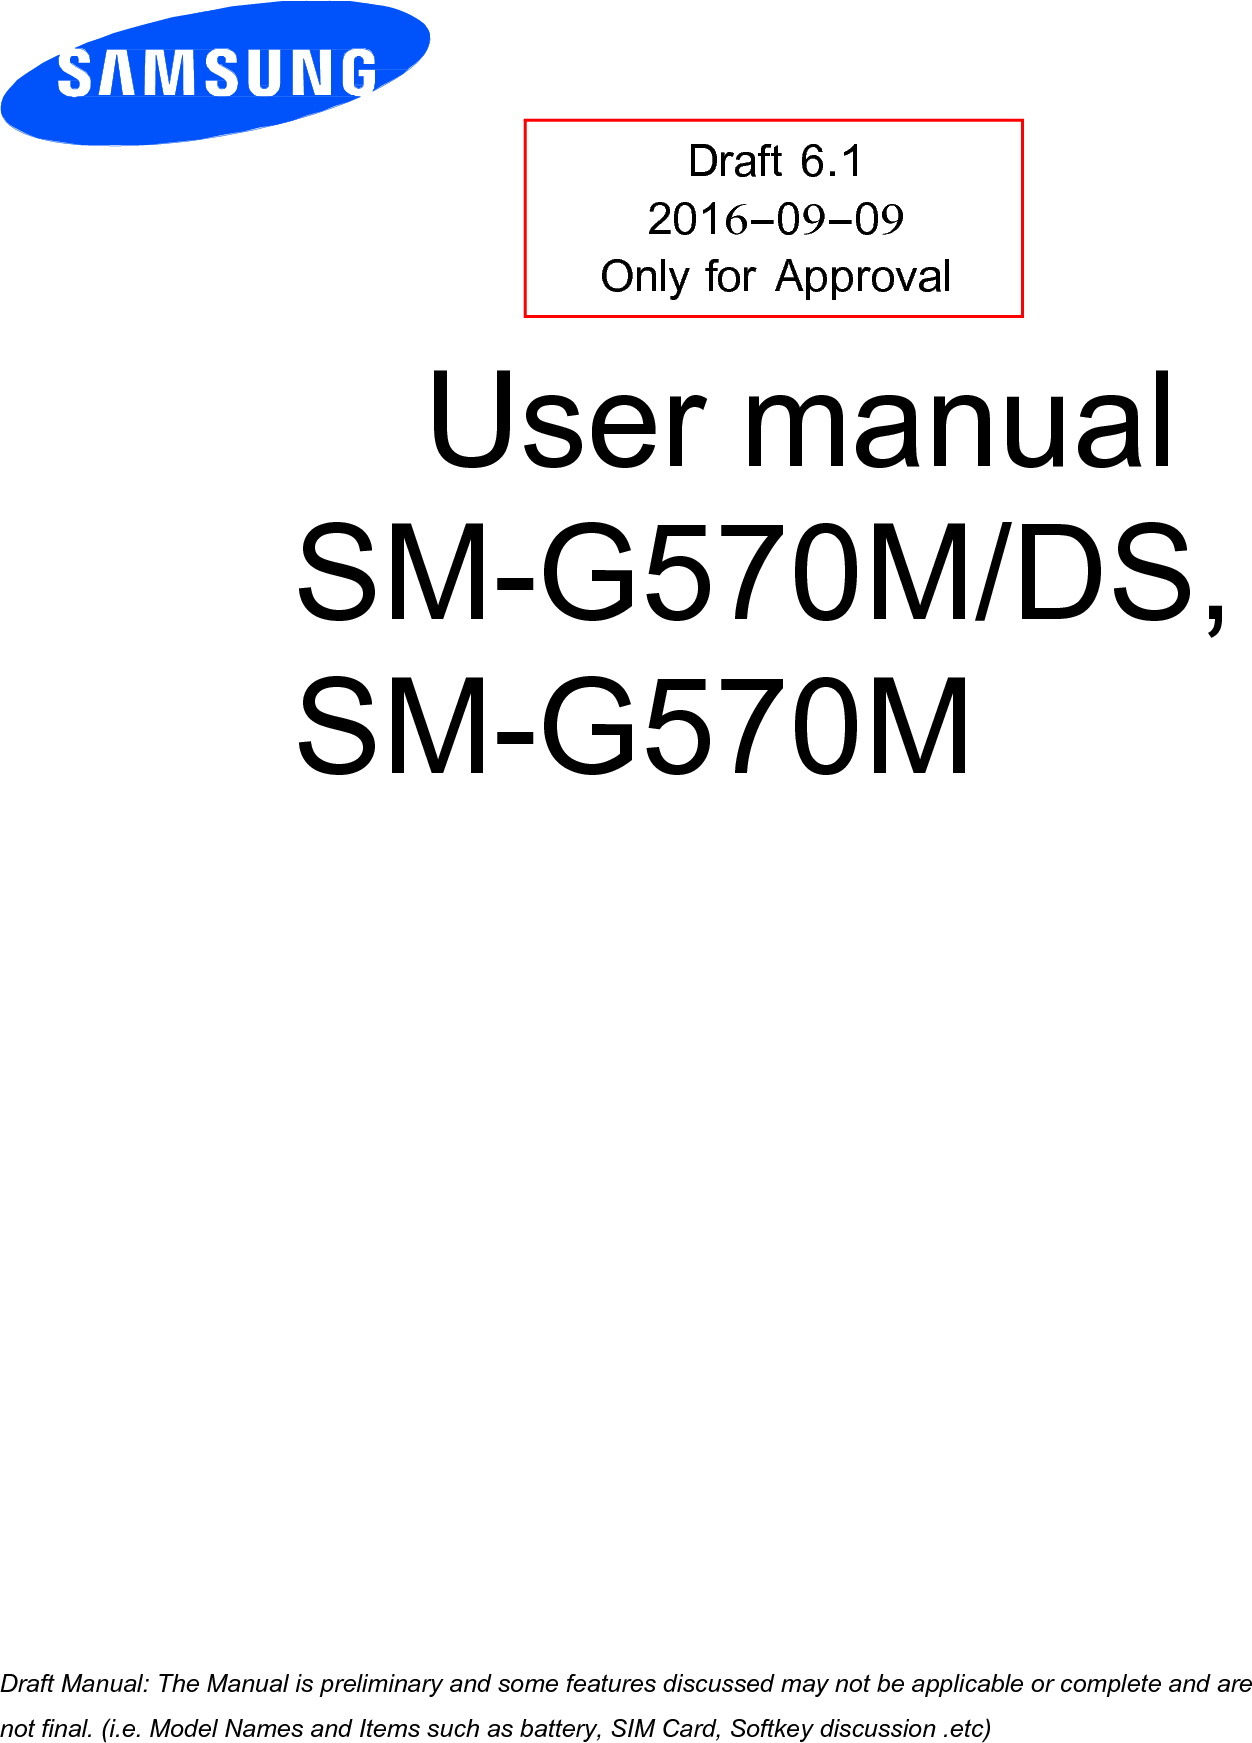 Draft 6.1 2016-09-09 Only for Approval User manual SM-G570M/DS,SM-G570M a ana  ana  na and  a dd a n  aa   and a n na  d a and   a a  ad  dn 